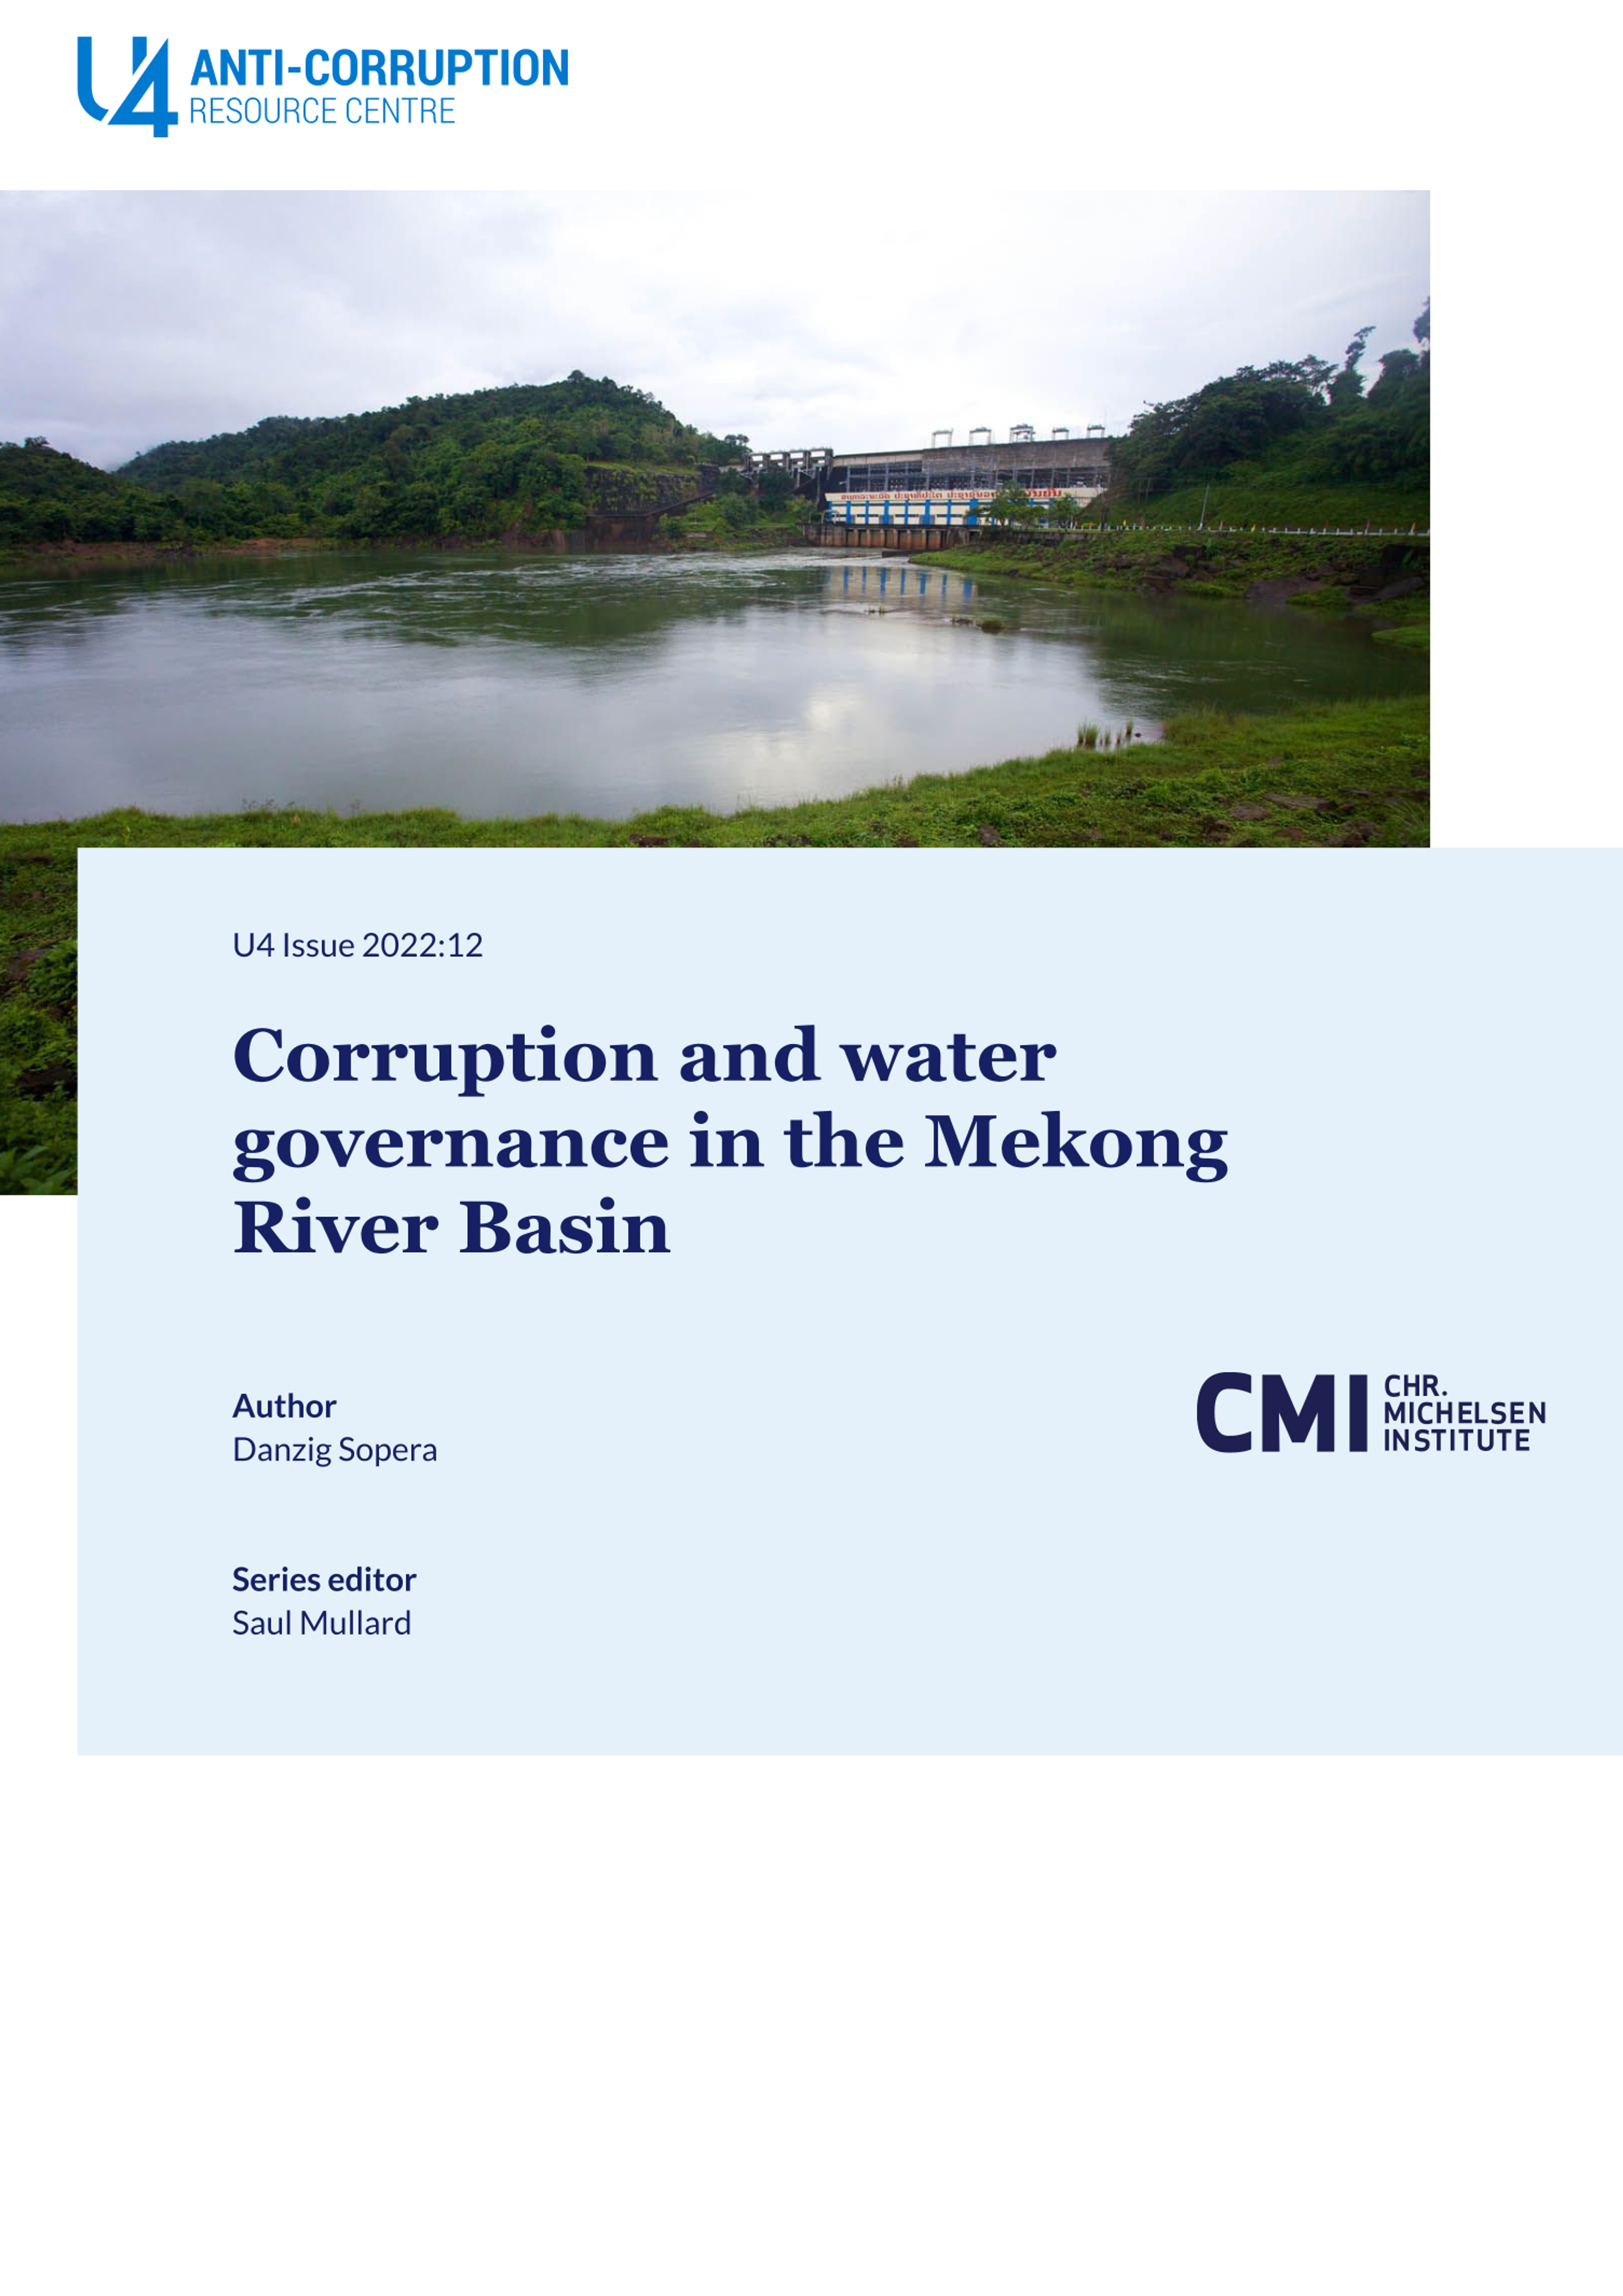 Corruption and water governance in the Mekong River Basin